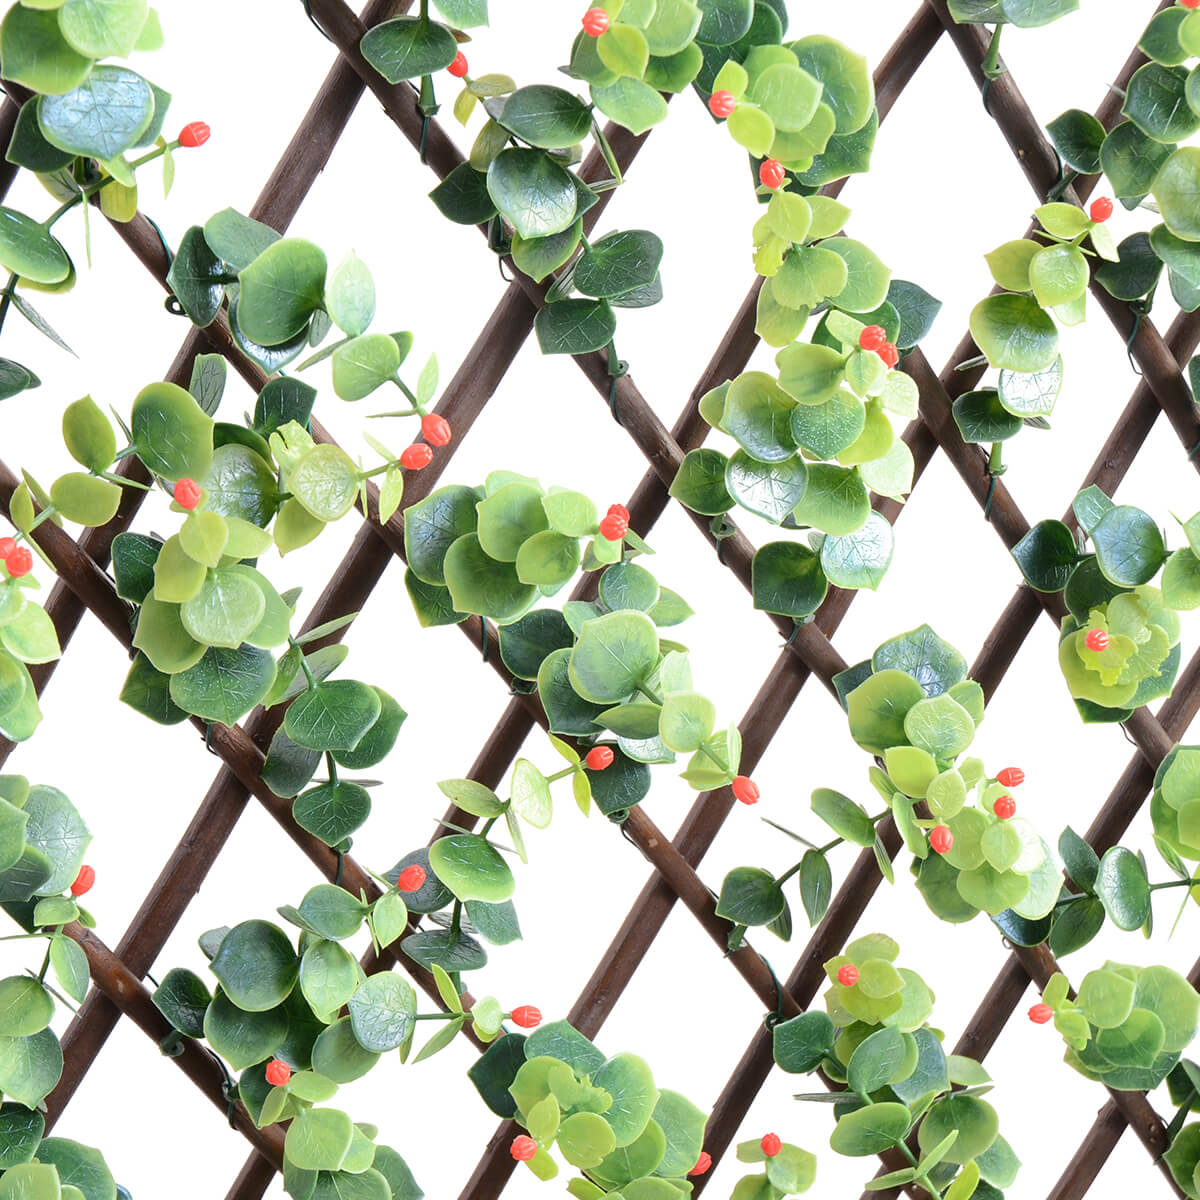 expandable trellis ilex and red berries 78 x 39